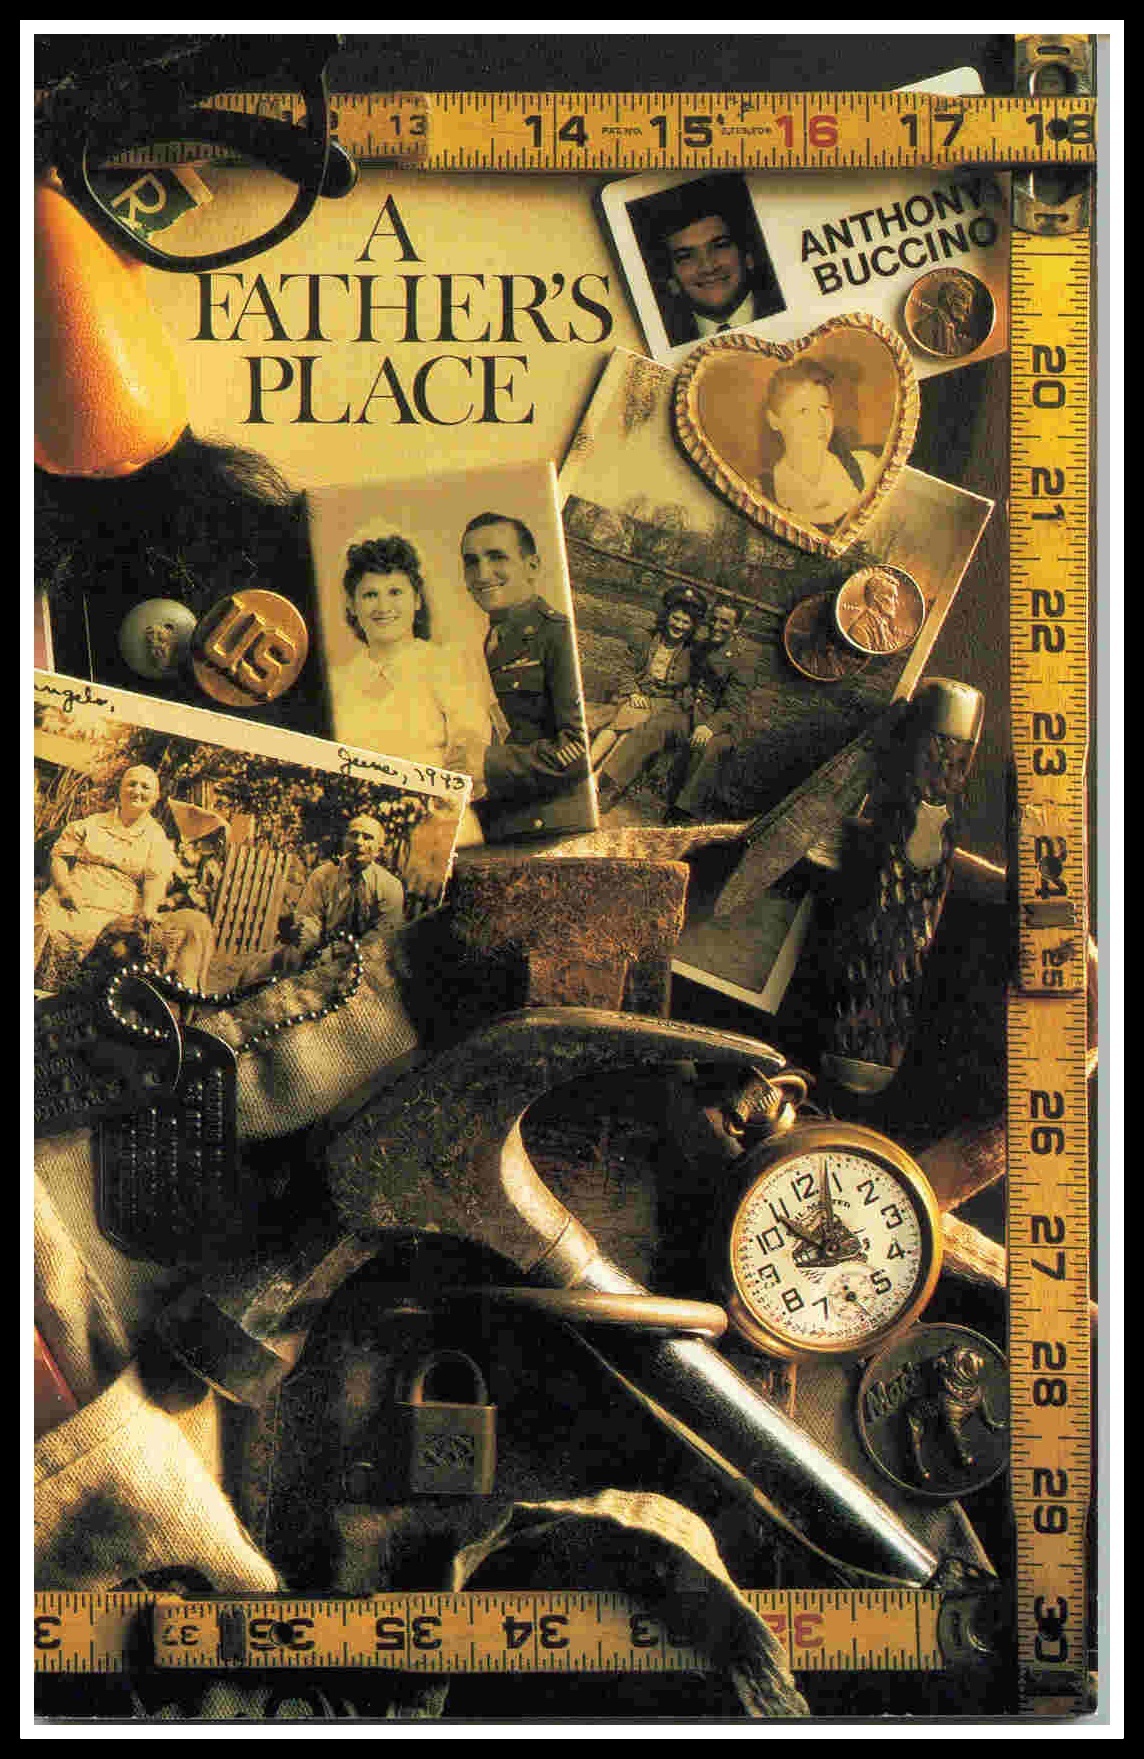 A Father's Place: An Eclectic Collection by Anthony Buccino